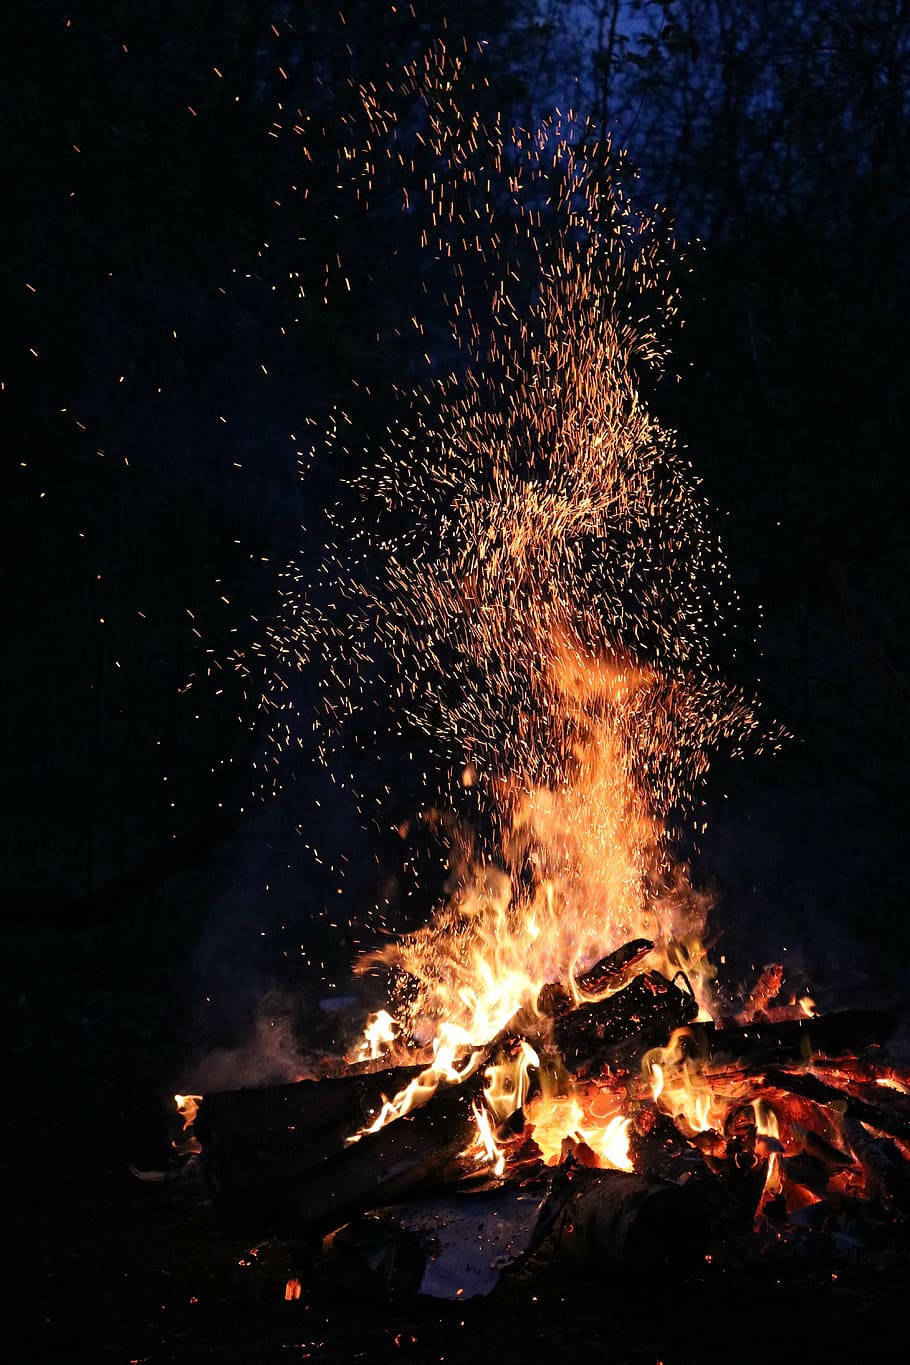 bonfire during nighttime, night, forest, koster, flame, spark, fever, fire, firewood, burns